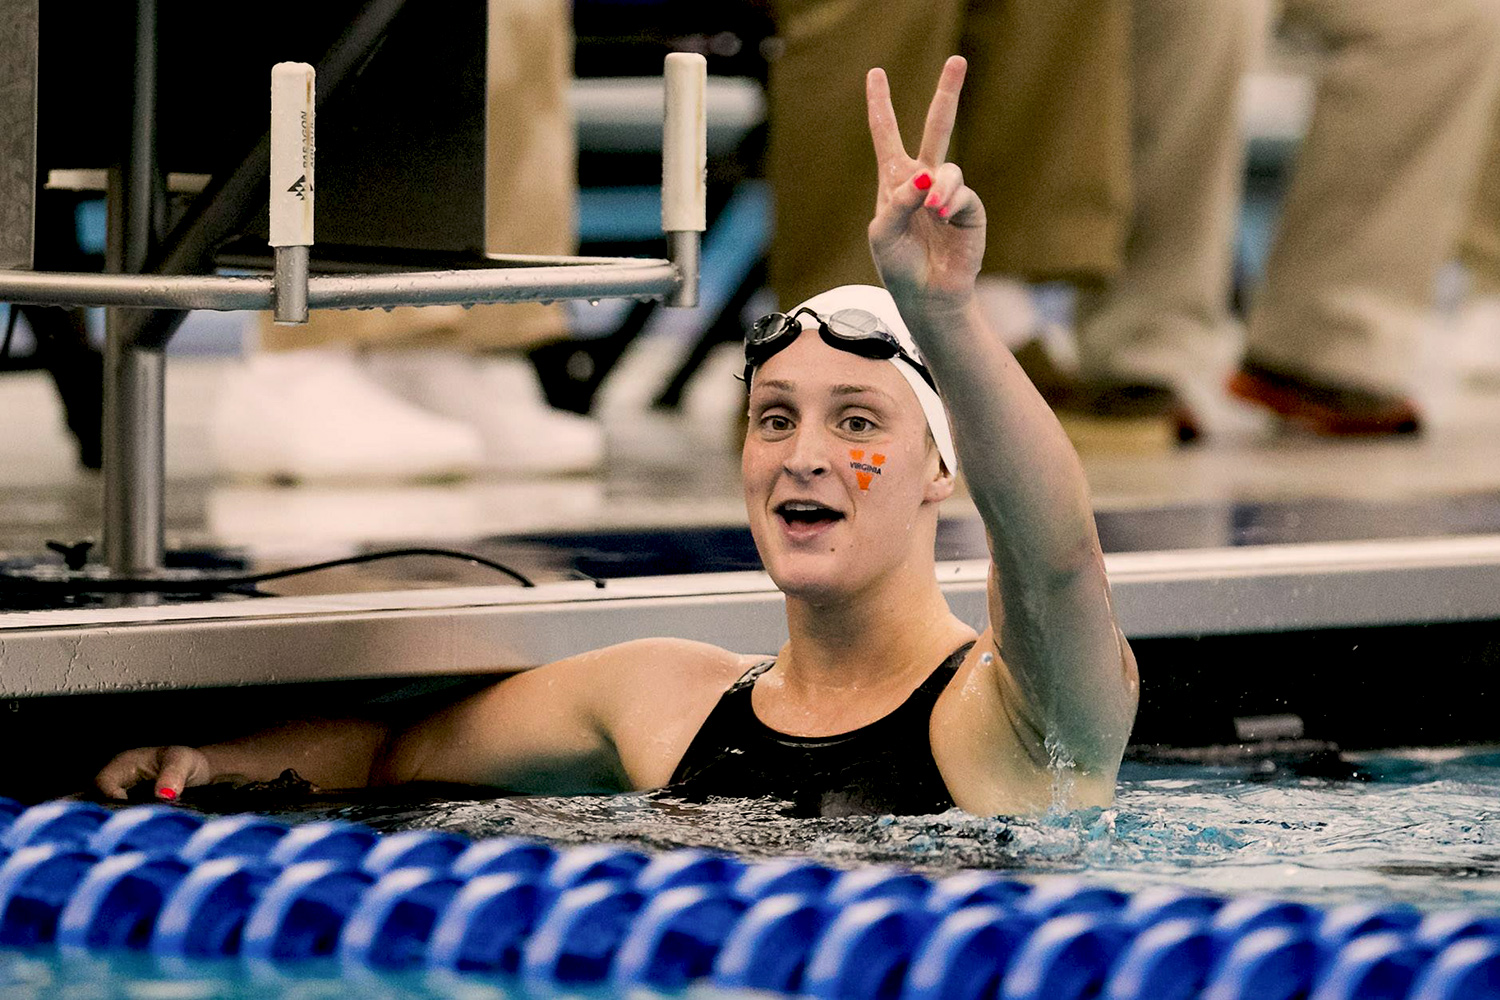 Leah Smith giving a peace sign to the crowd in the pool after a race